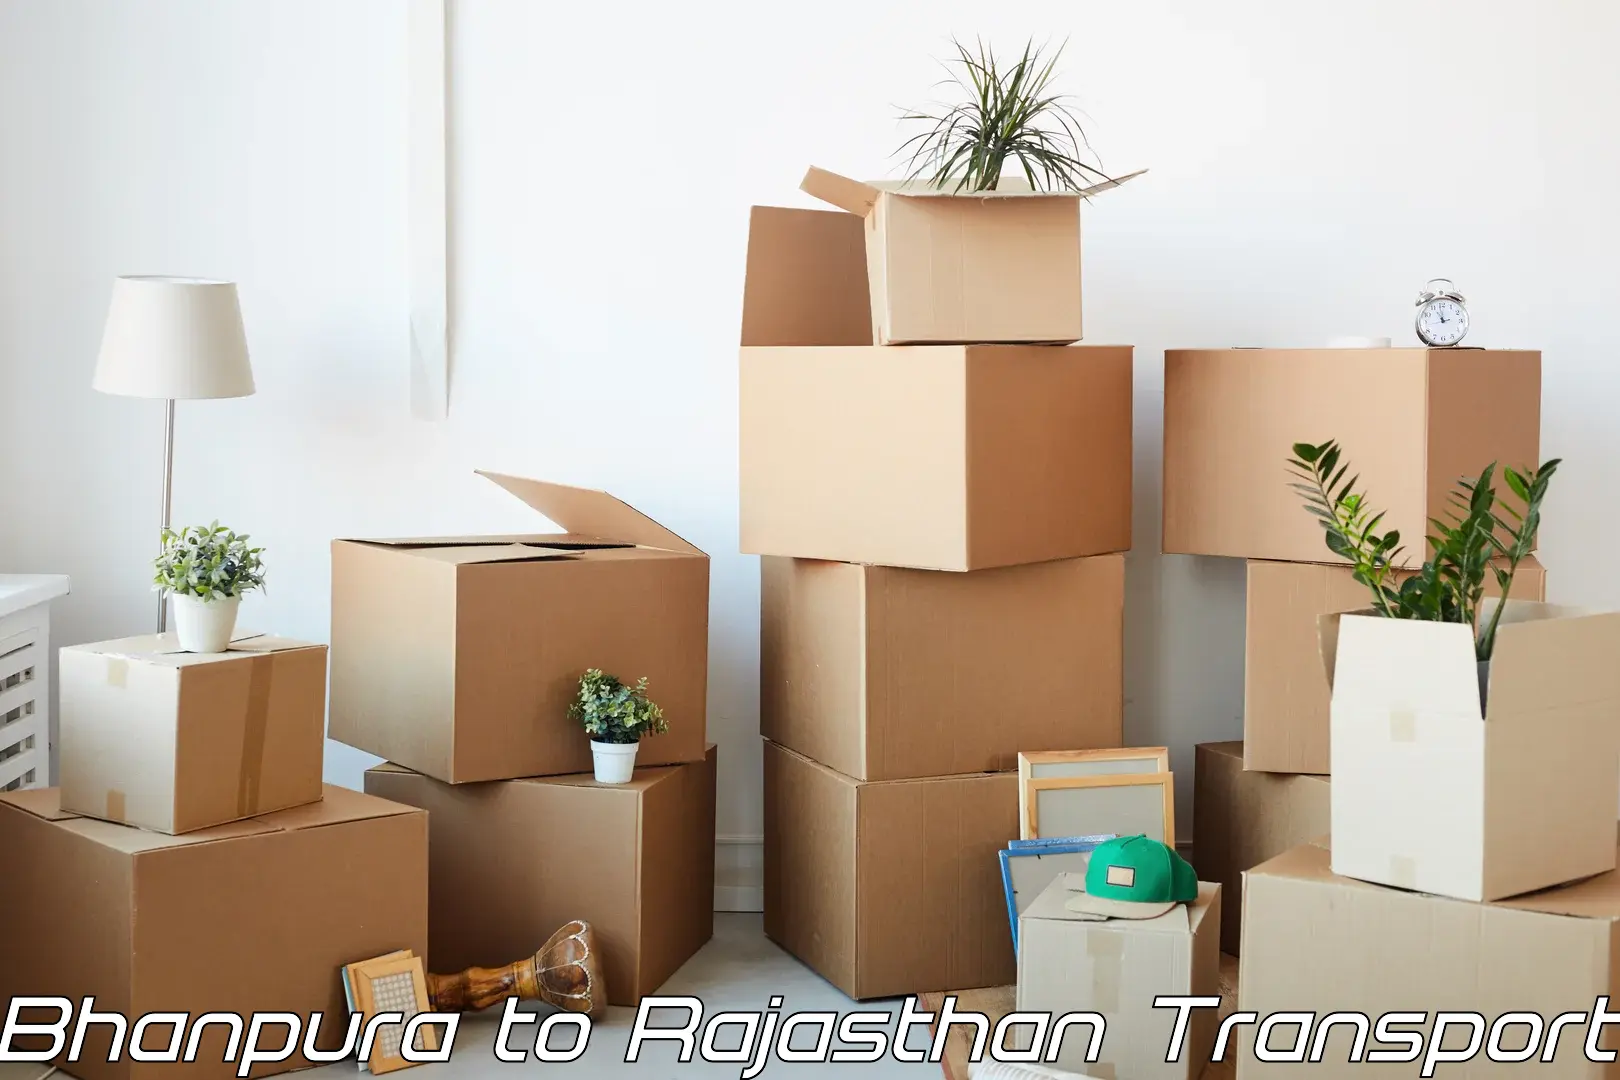 Container transport service Bhanpura to Rajasthan